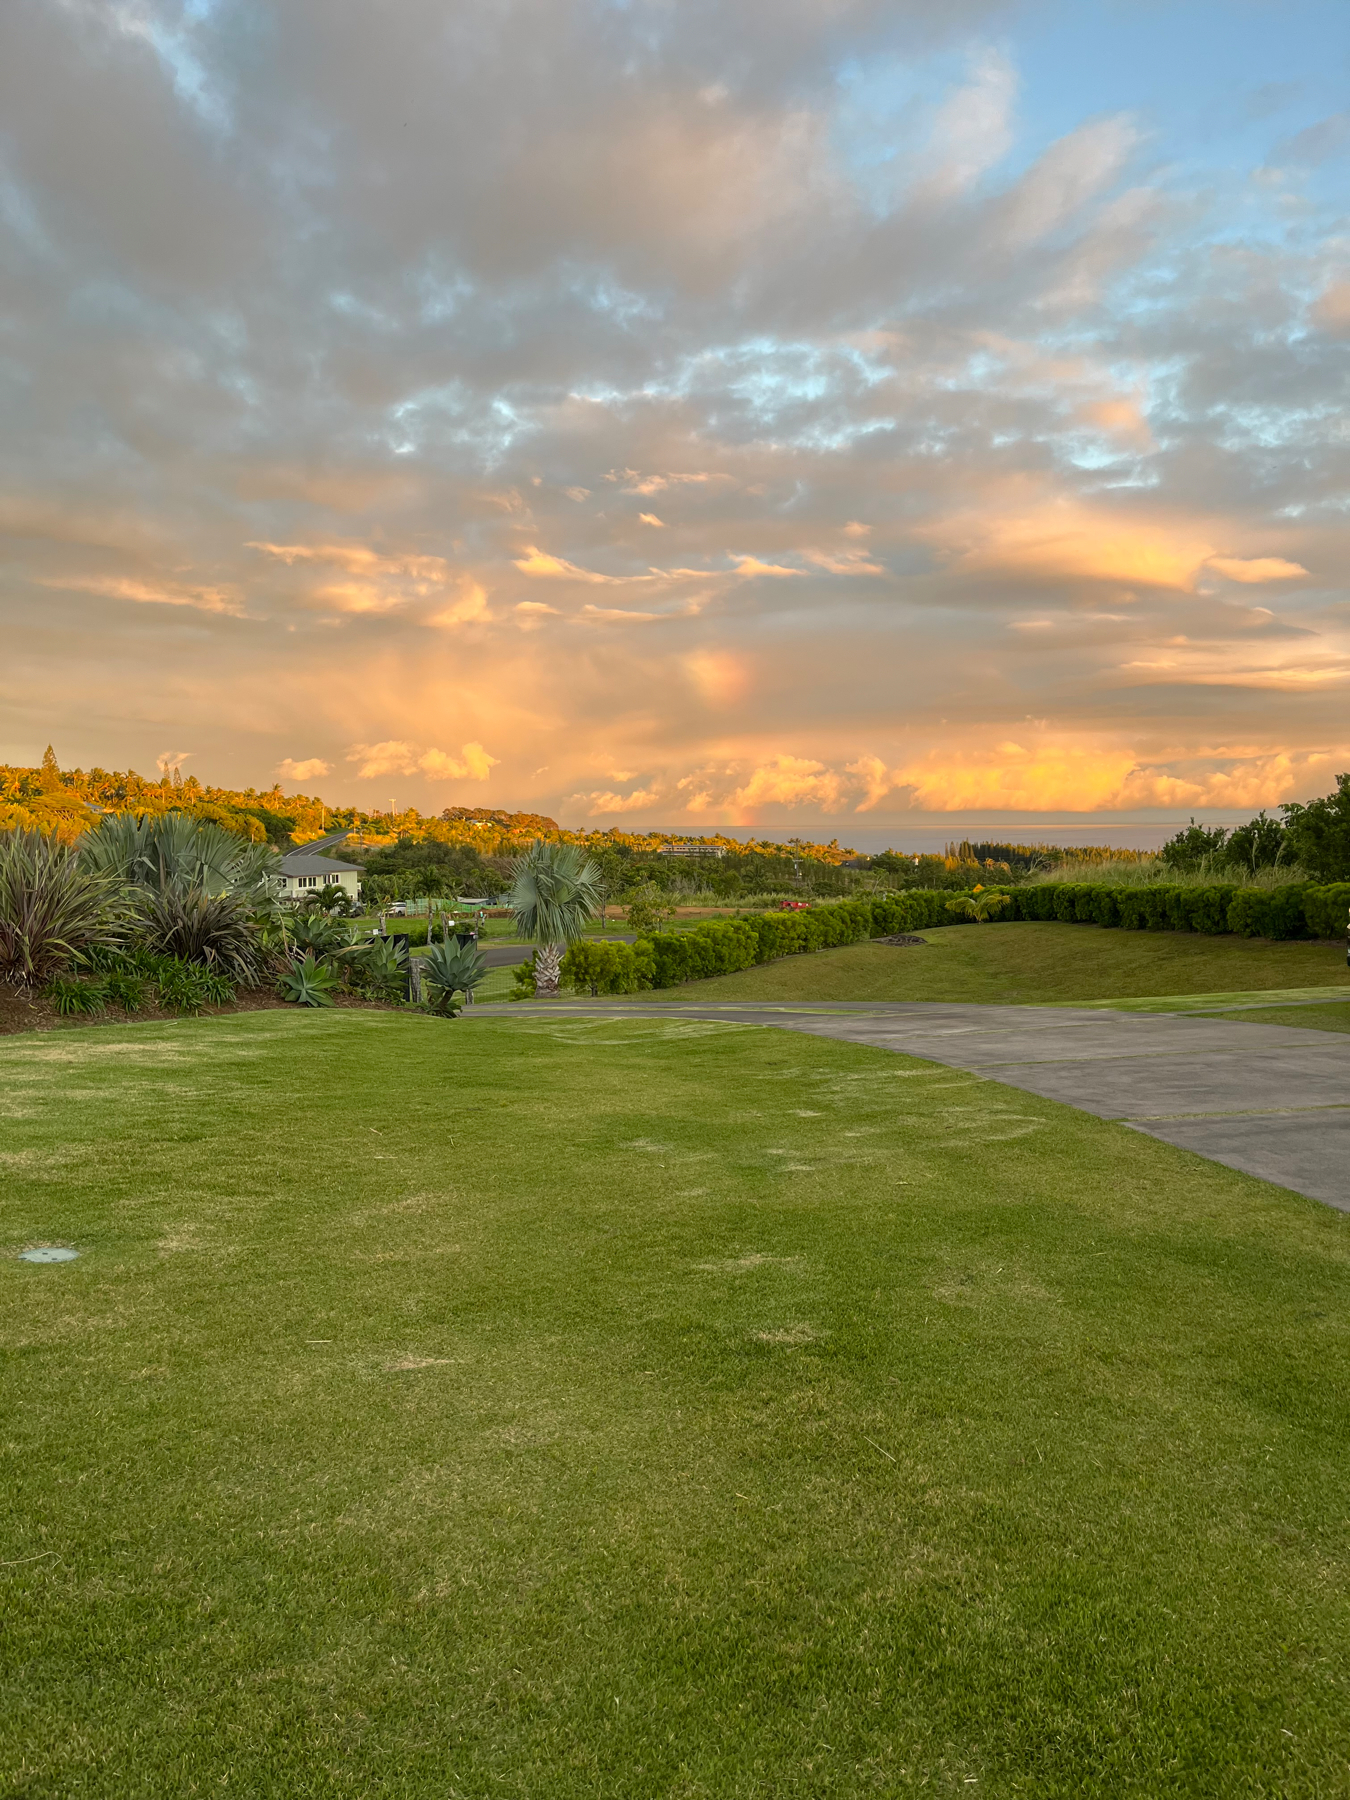 An early morning view at sunrise with lush green grass in the foreground, a variety of plants and trees in the middle, and a dramatic sky filled with golden clouds above